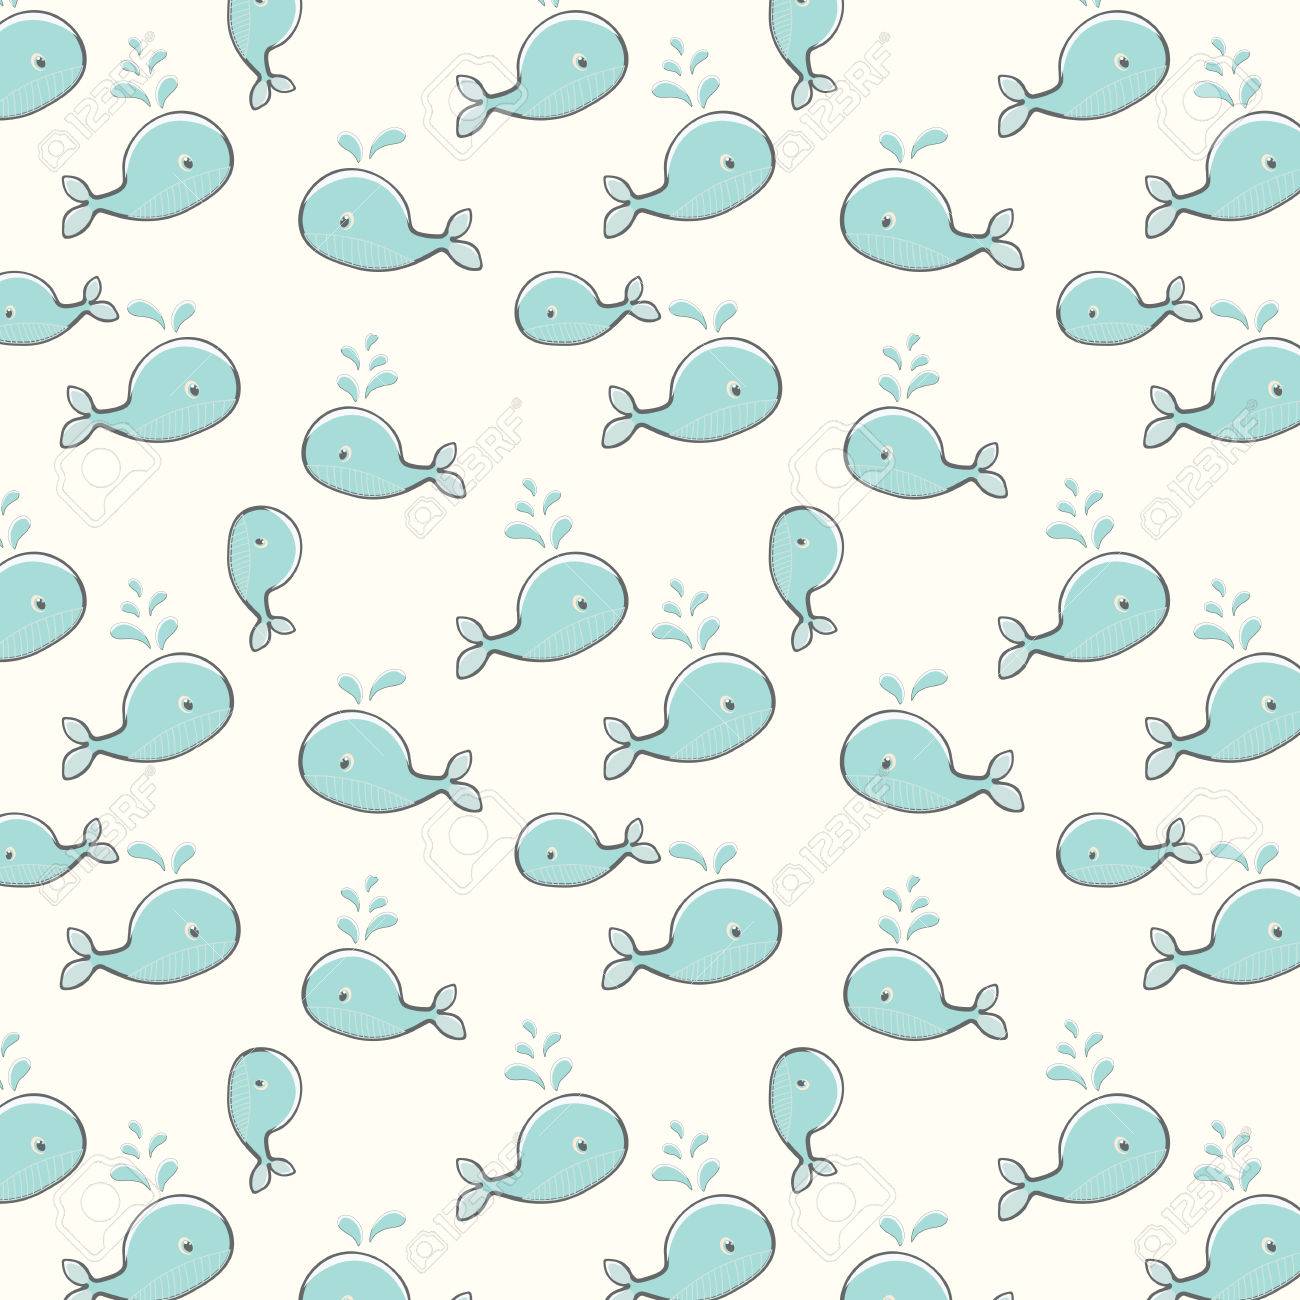 Cute Background With Cartoon Blue Whales Baby Shower Design